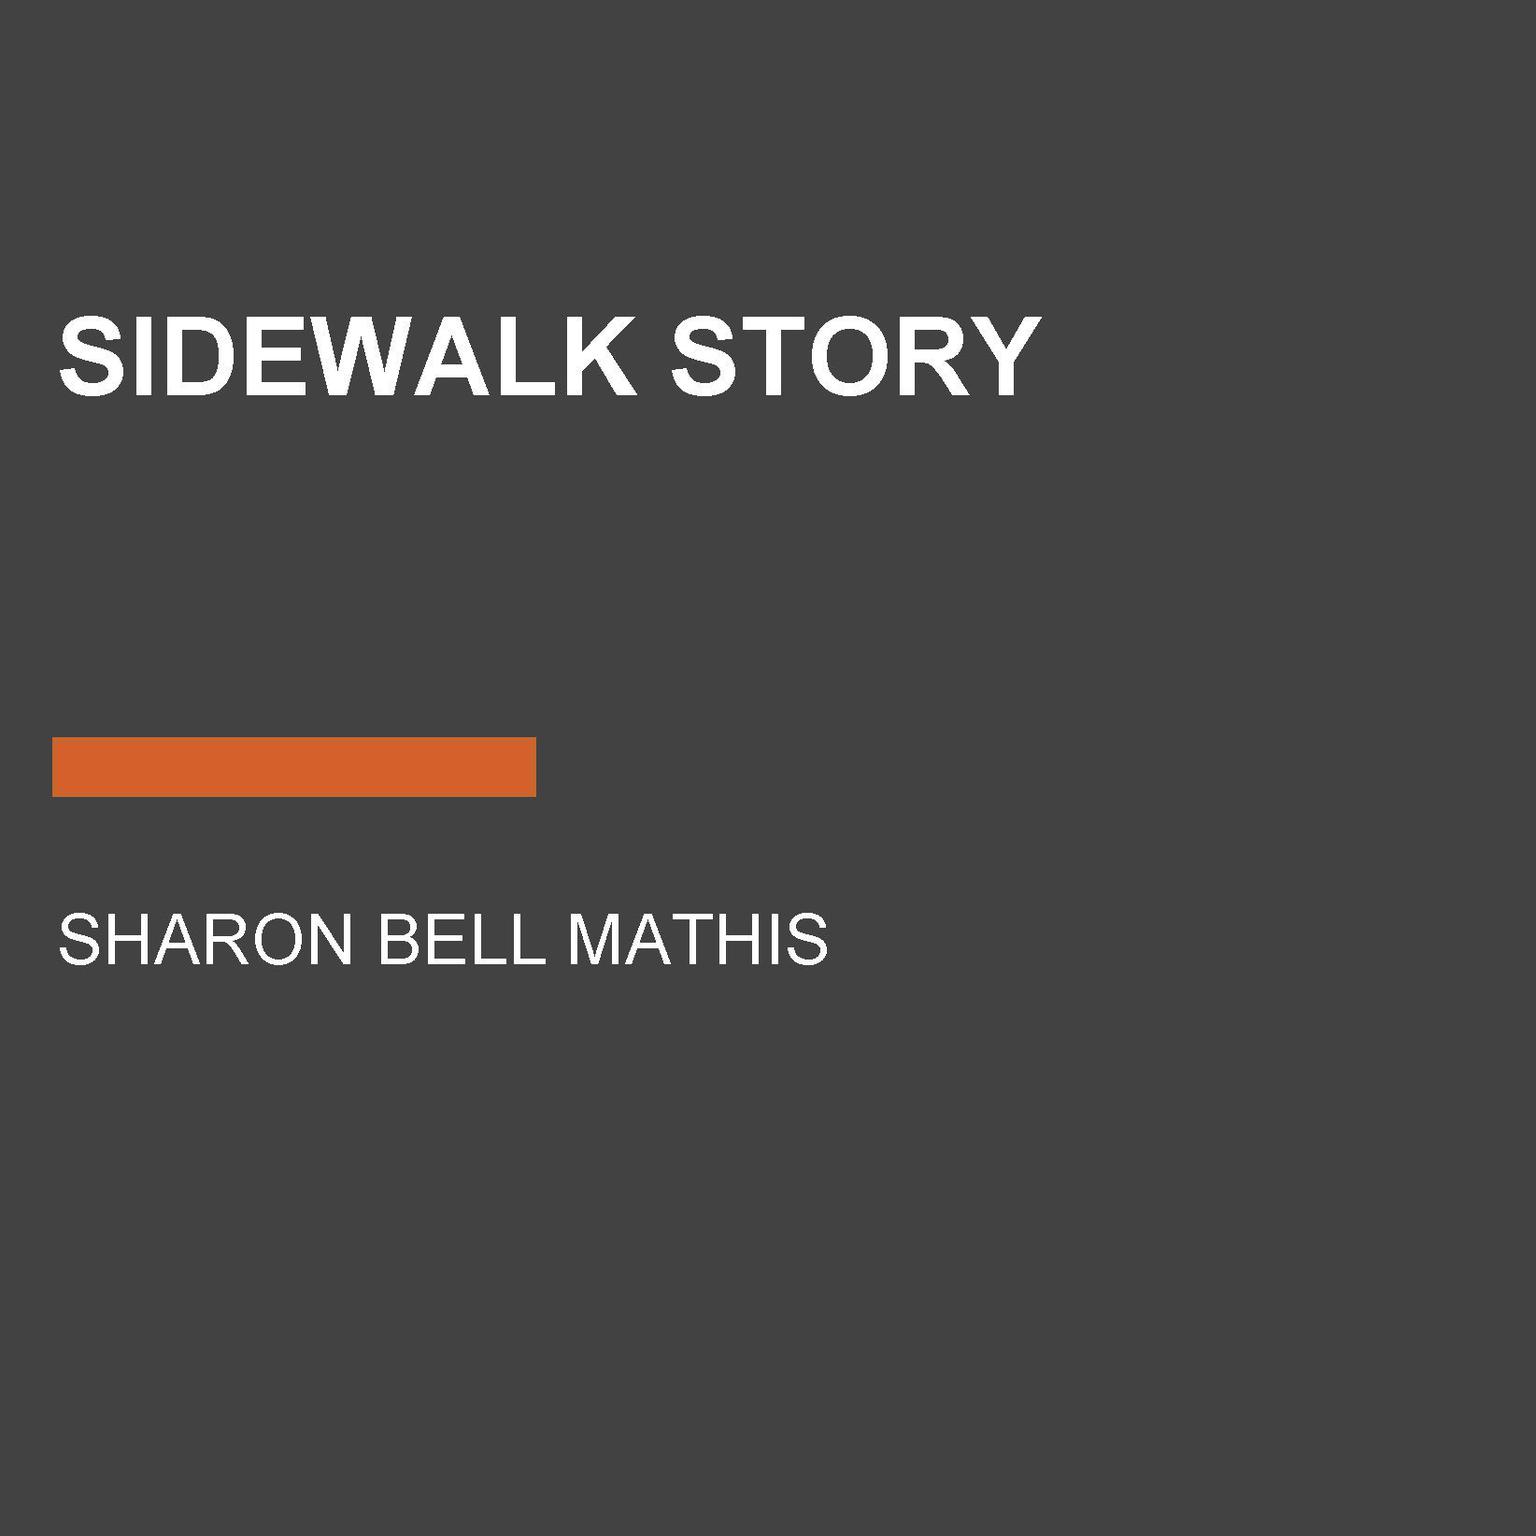 Sidewalk Story Audiobook, by Sharon Bell Mathis